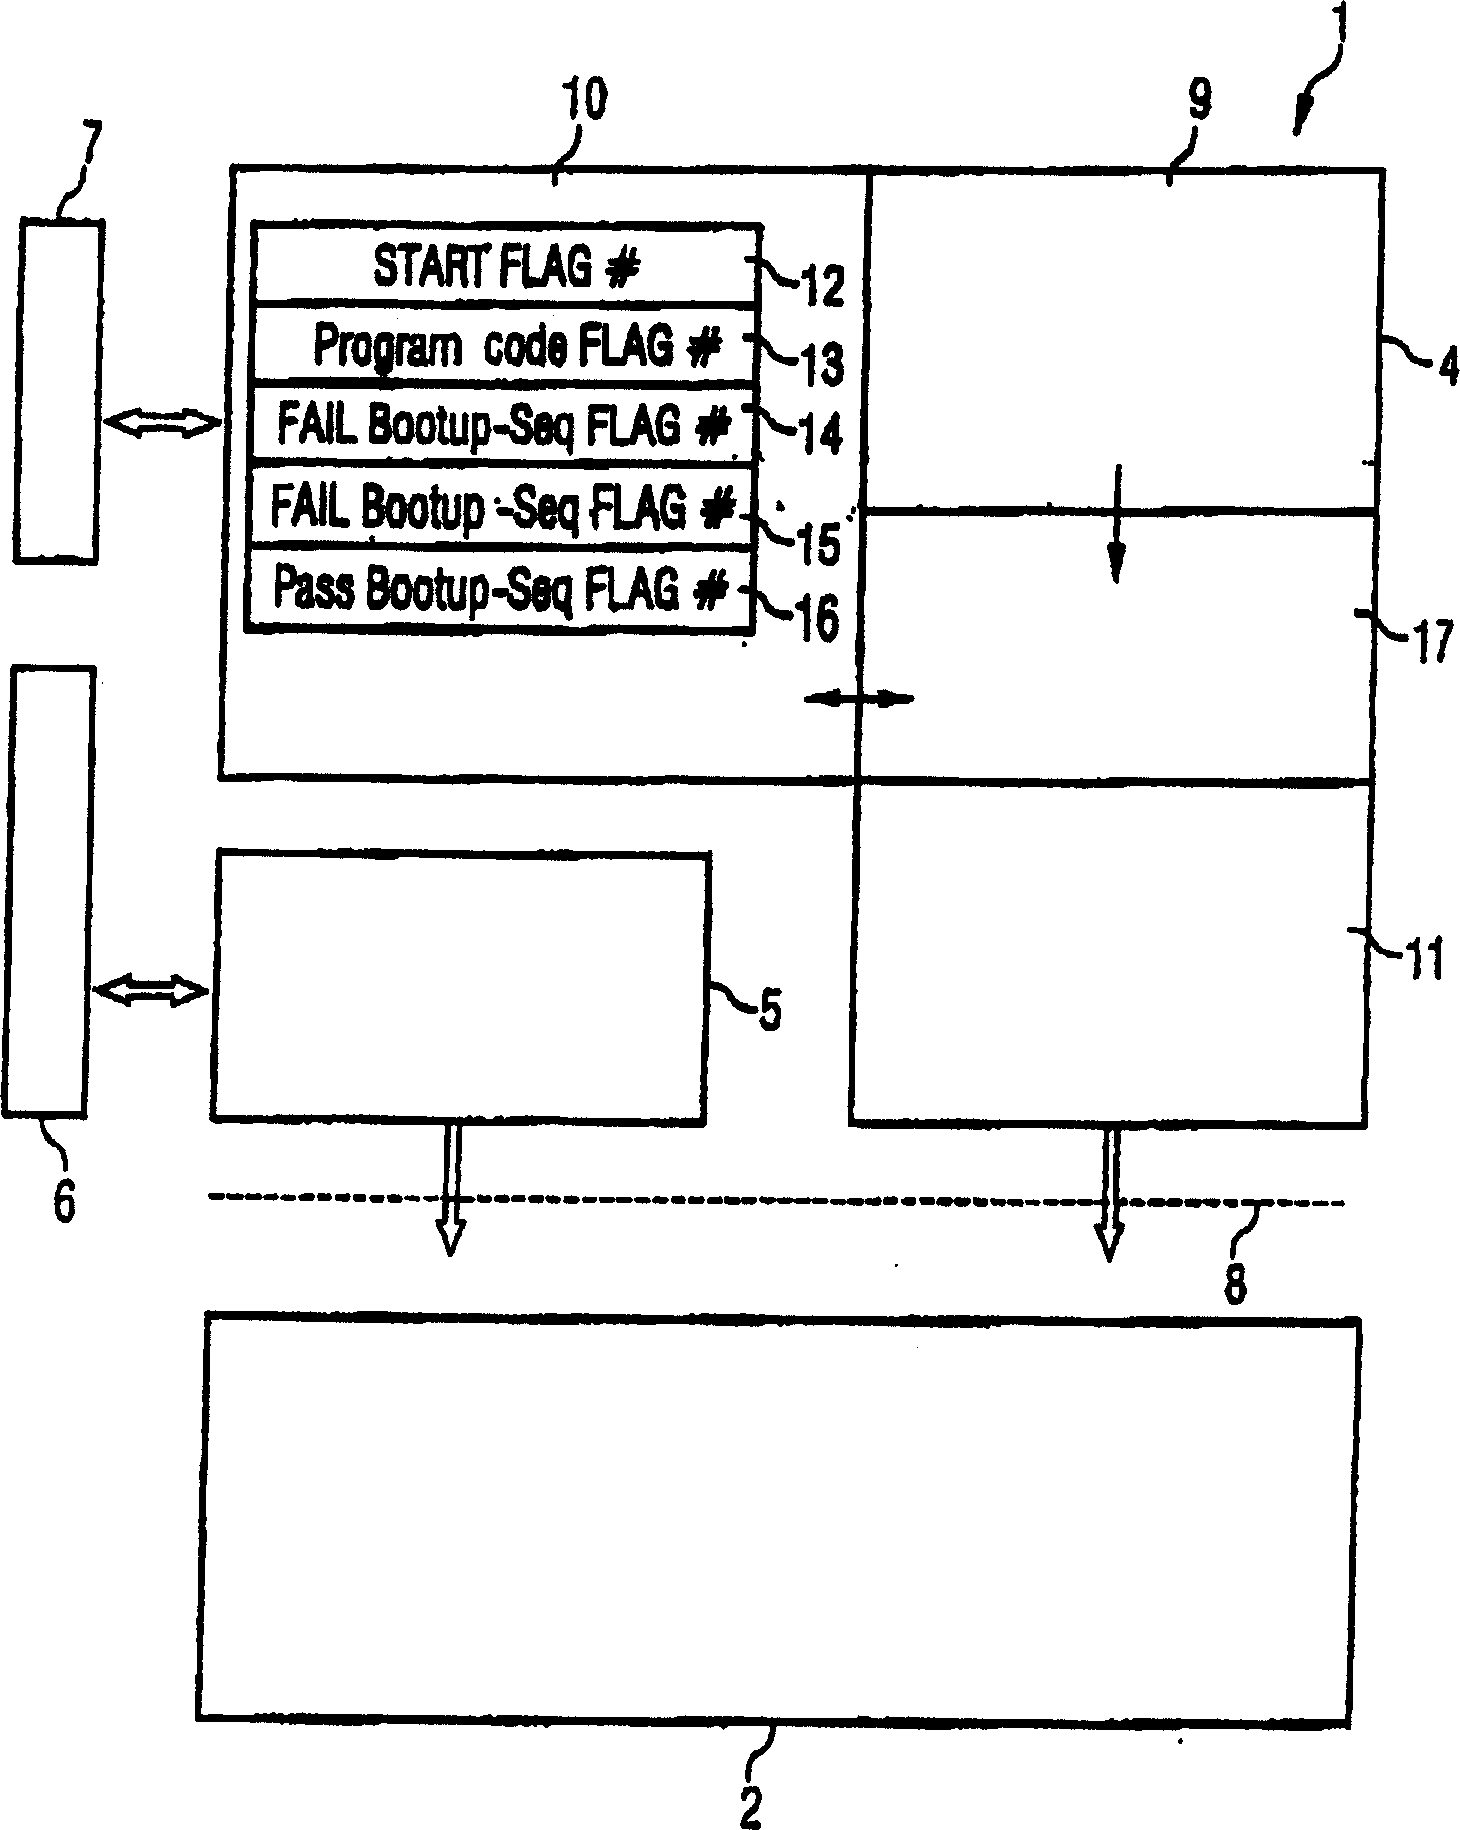 Semiconductor circuit and method for testing, monitoring and application-near setting of a semiconductor circuit